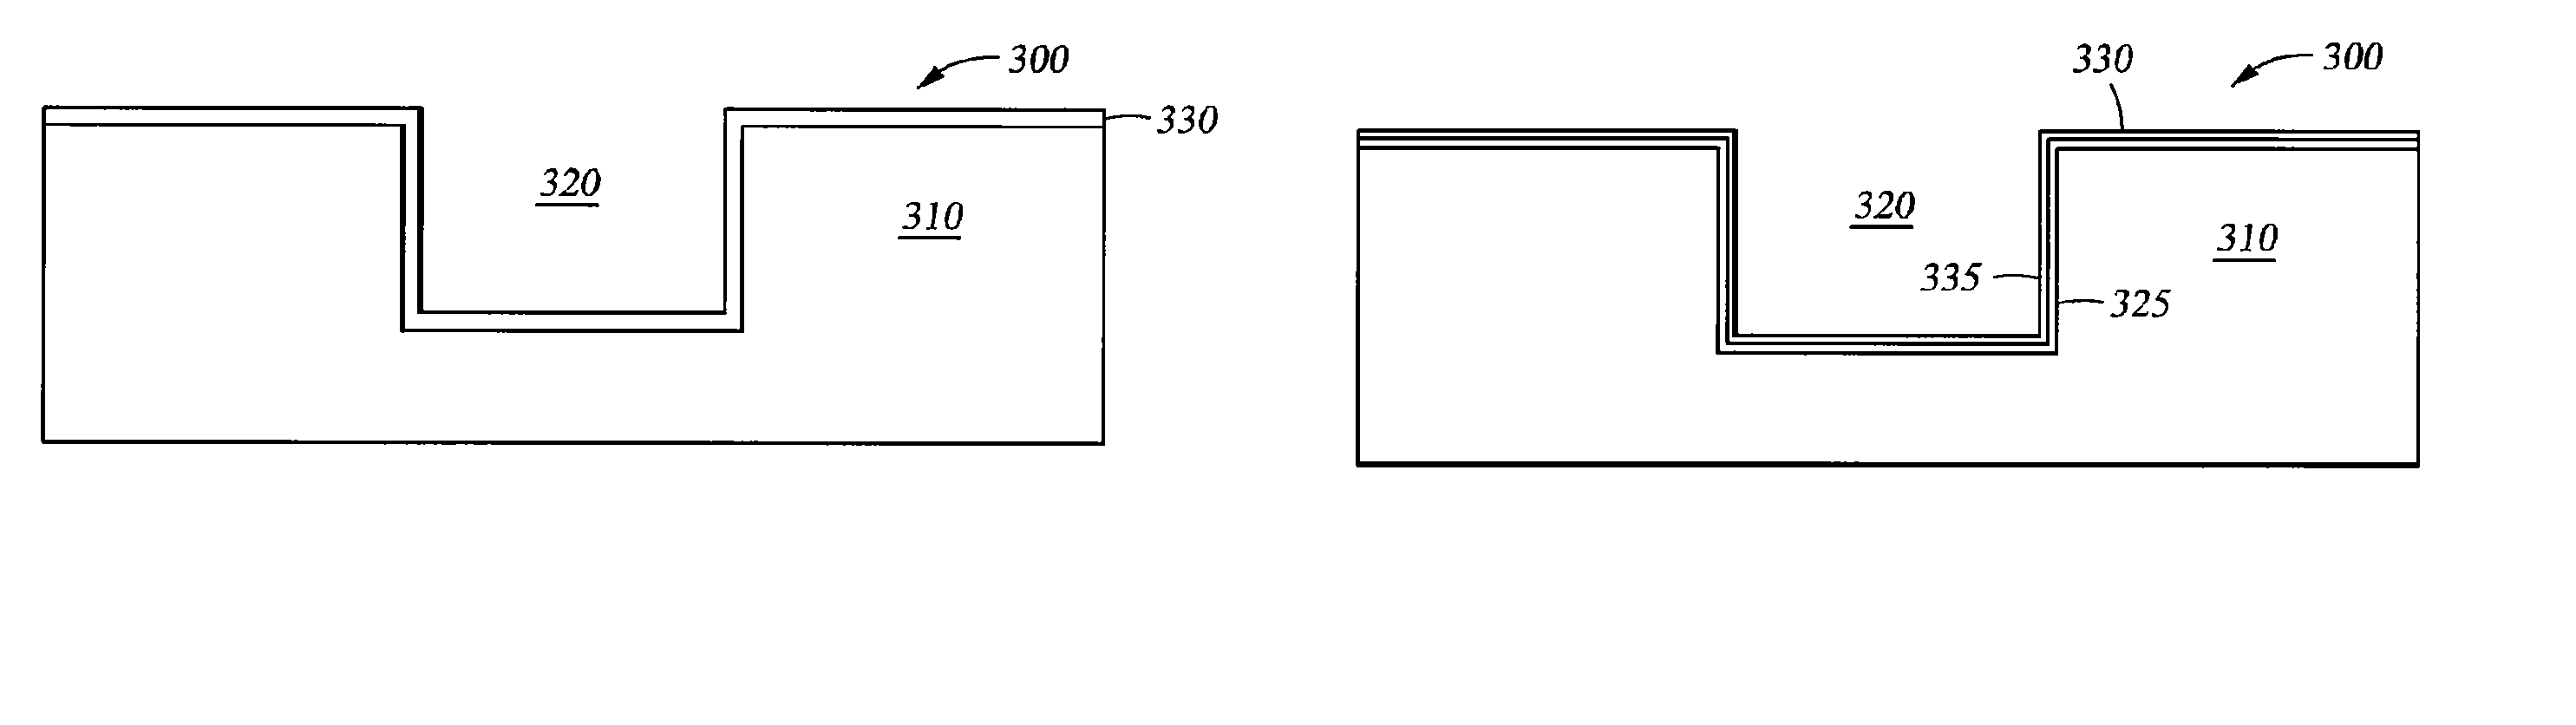 Deposition methods for barrier and tungsten materials